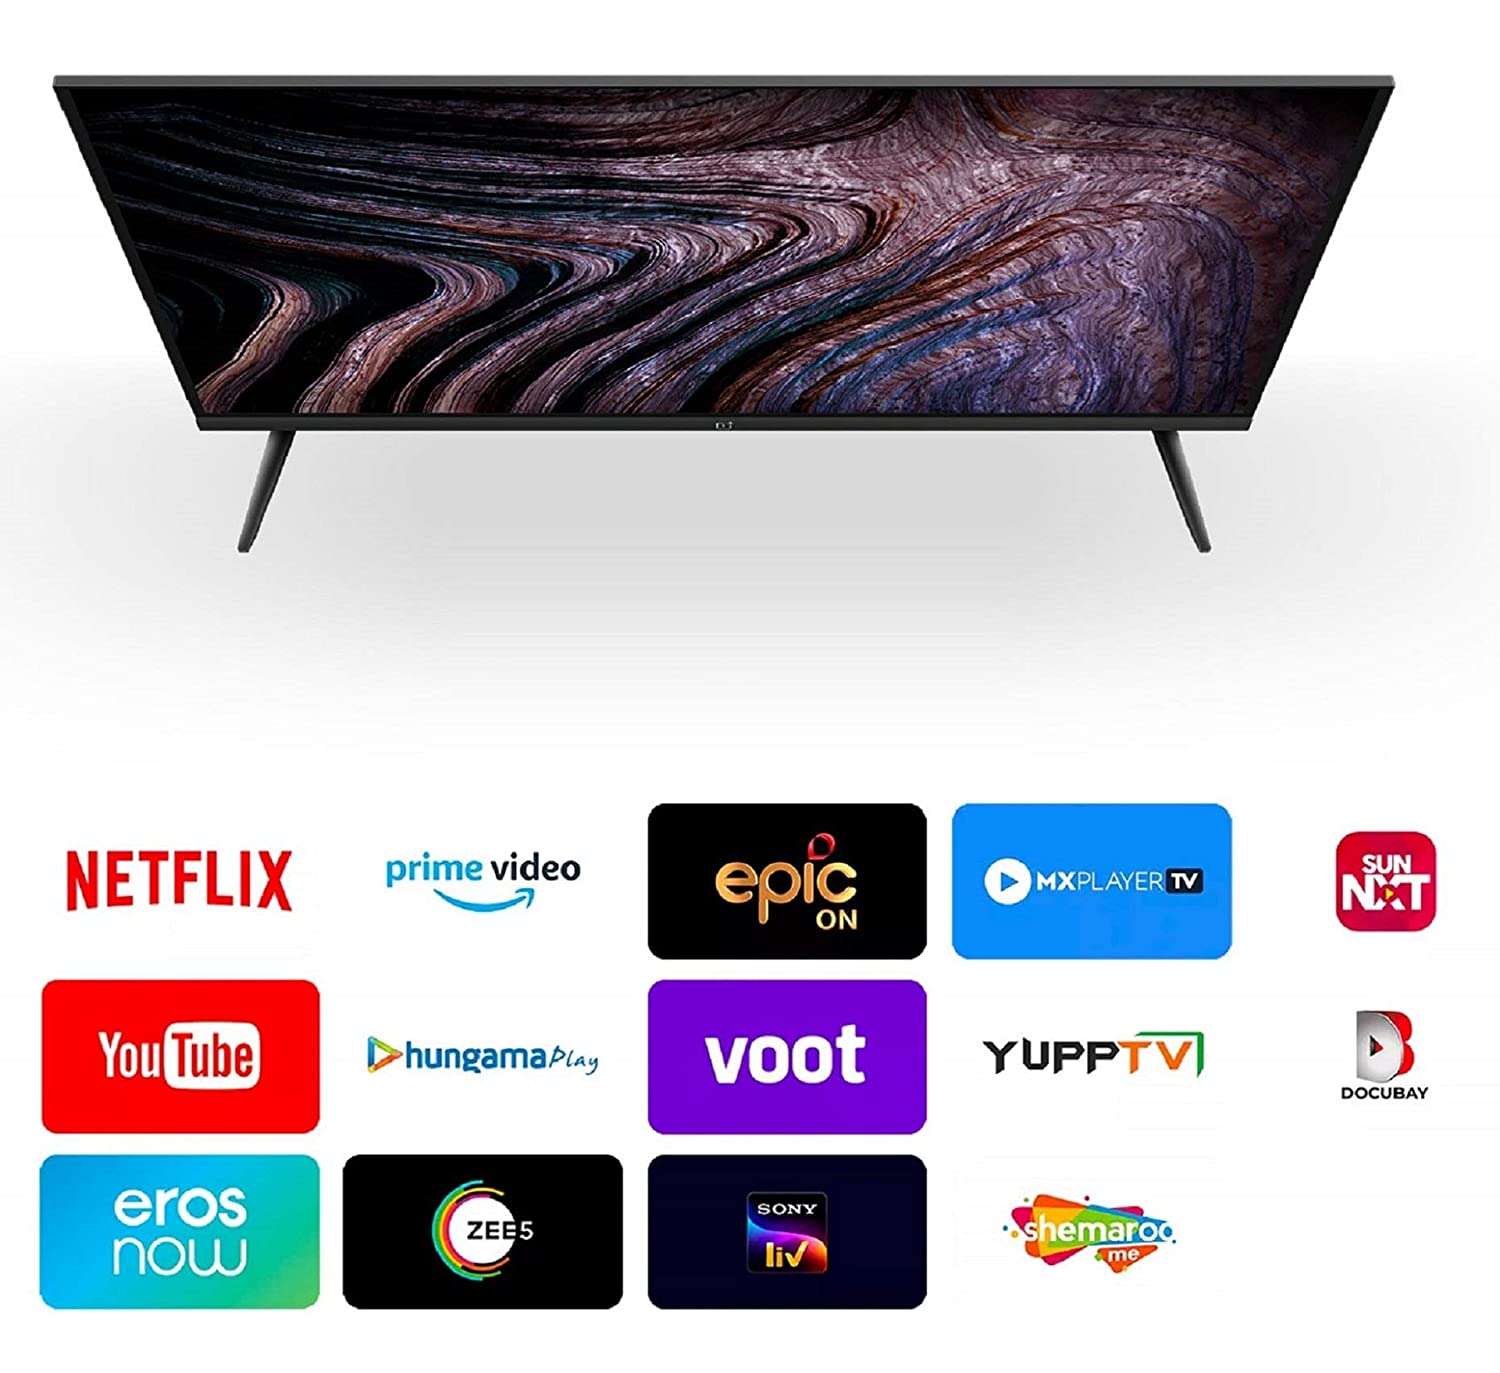 OnePlus Y Series 32Y1 (32-Inch) LED Smart Android TV